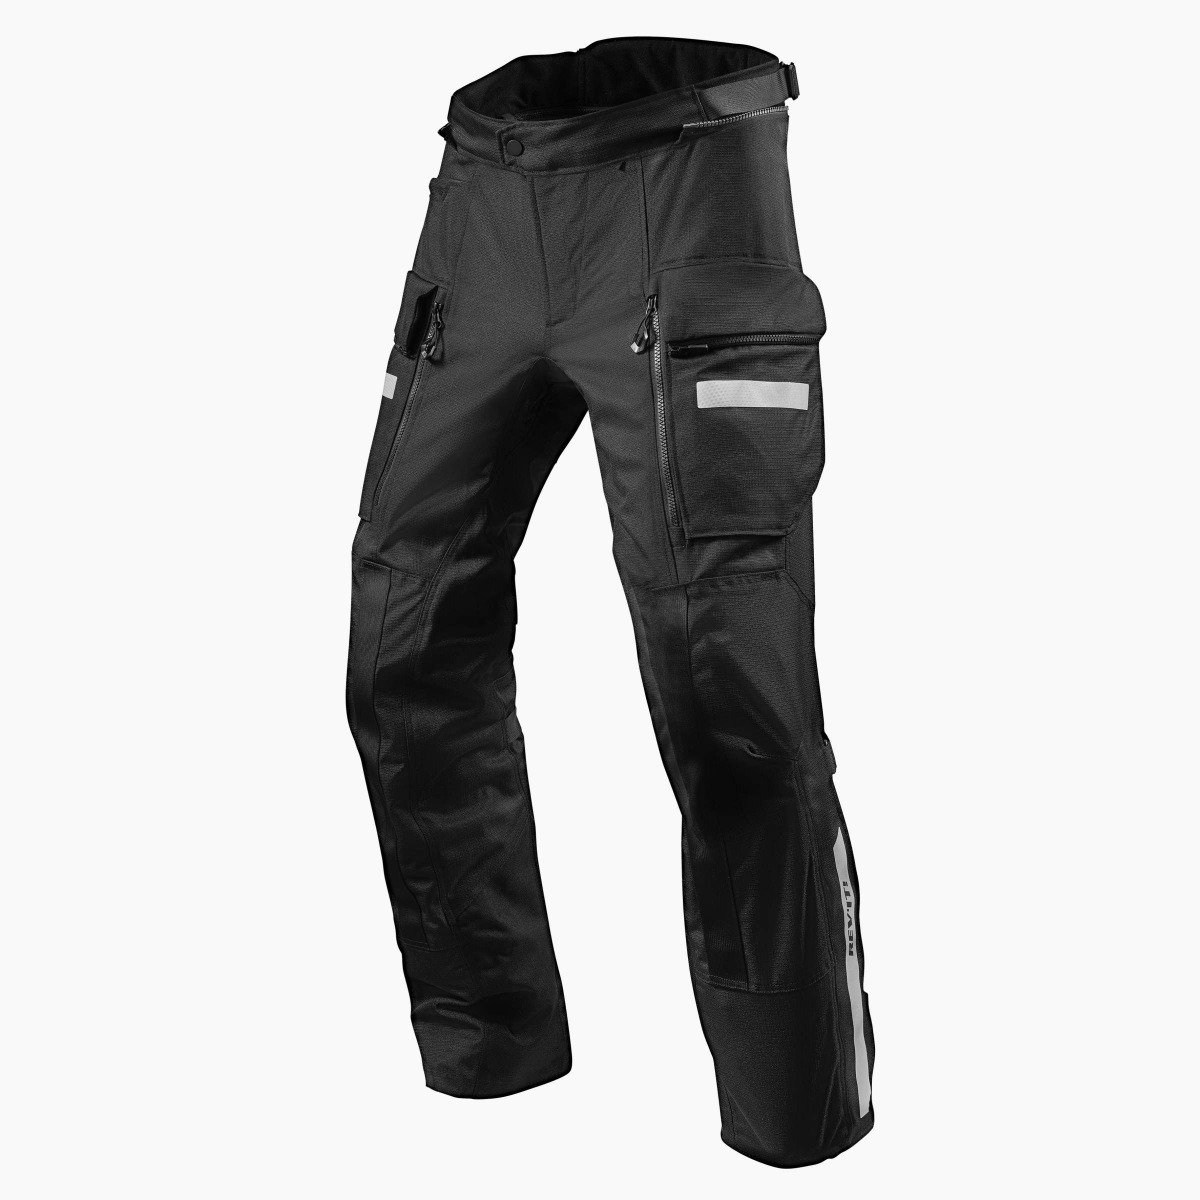 Image of REV'IT! Sand 4 H2O Long Black Motorcycle Pants Size L ID 8700001316385